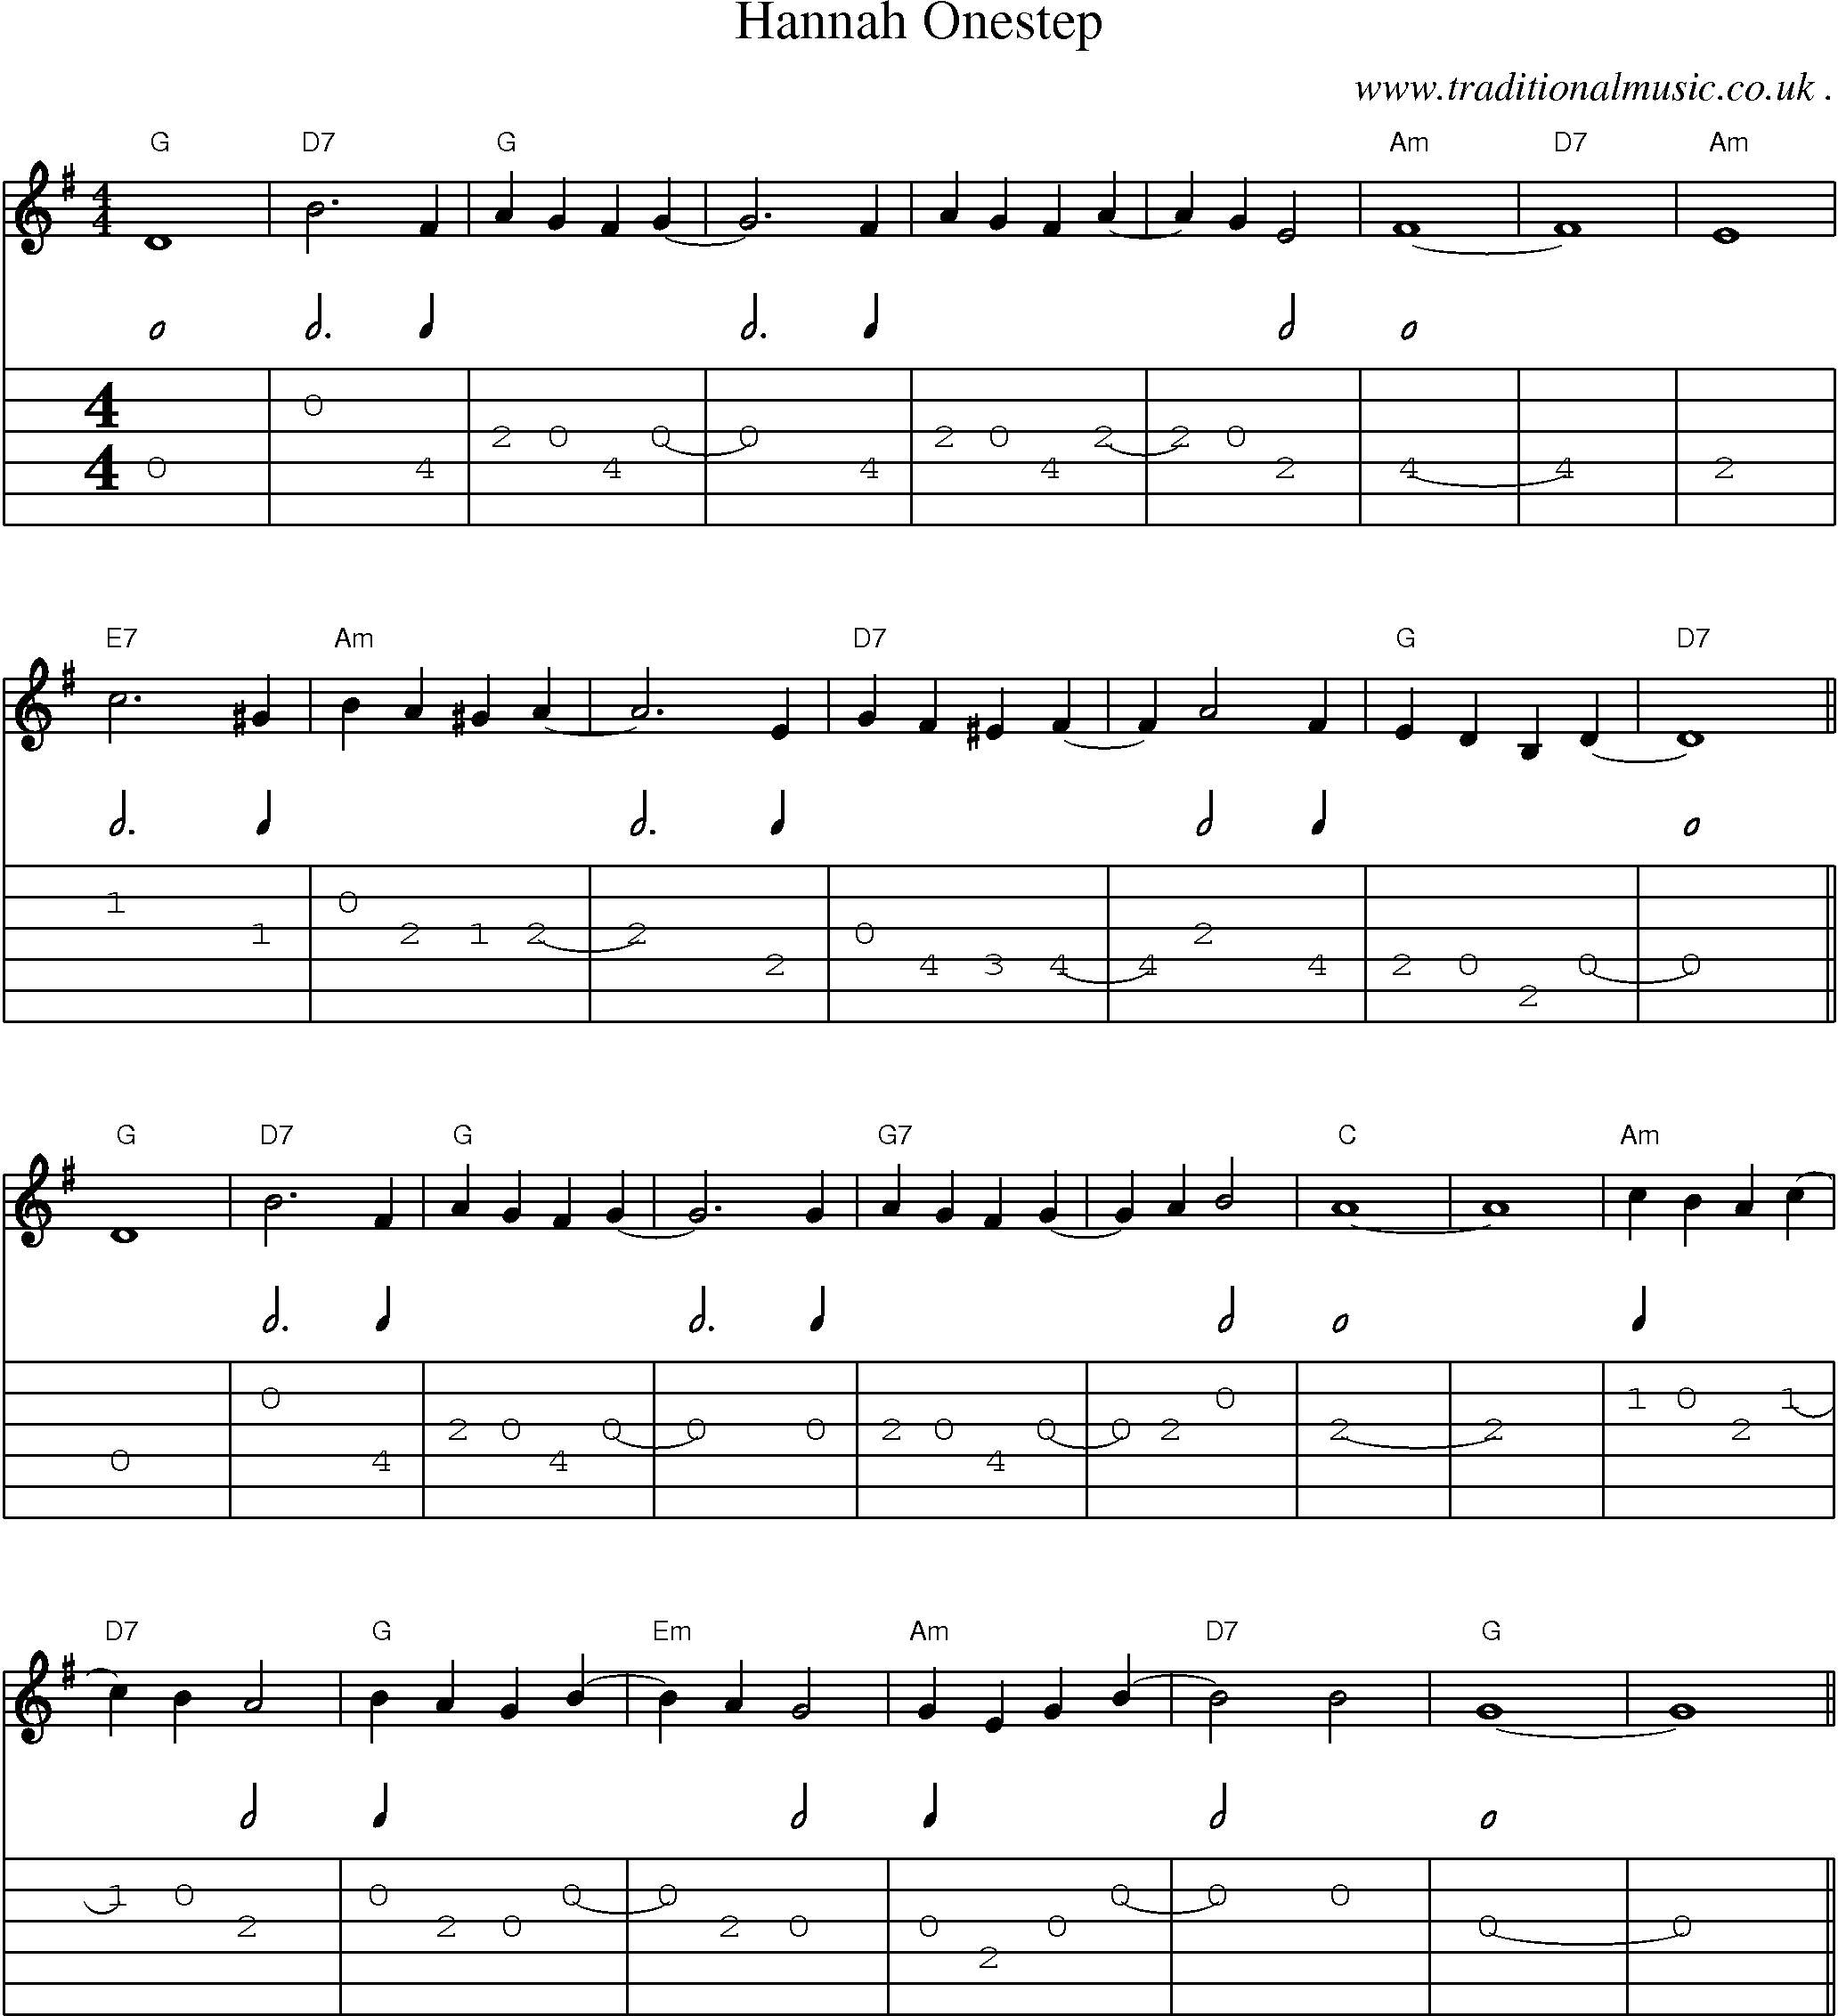 Sheet-Music and Guitar Tabs for Hannah Onestep